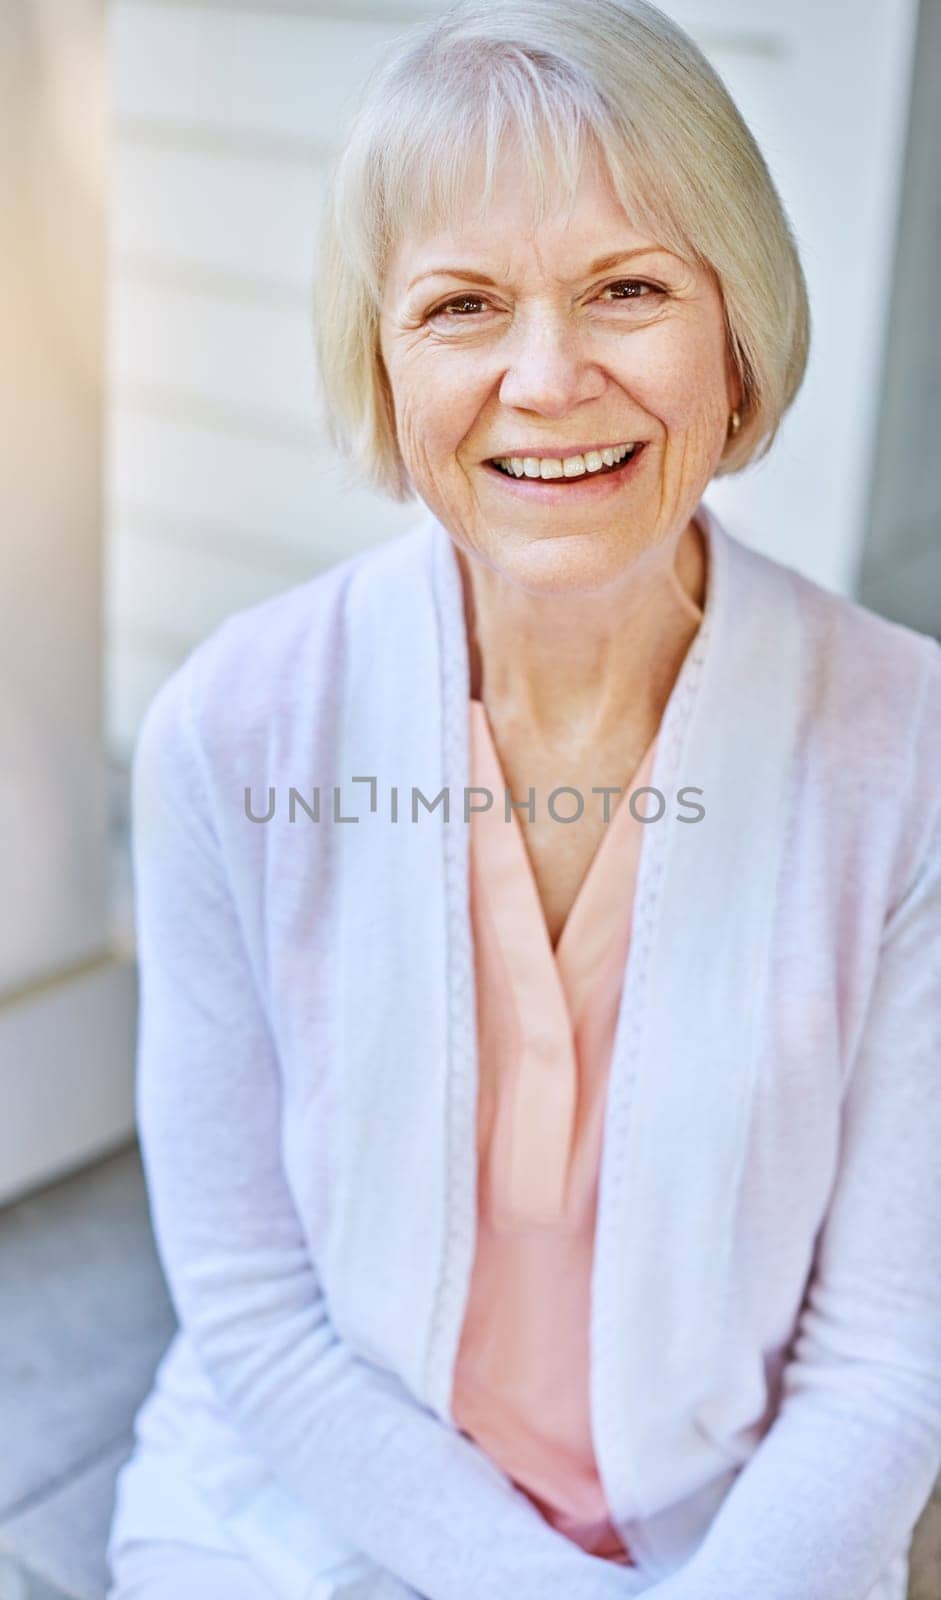 Im wearing my summer smile. Cropped portrait of a senior woman sitting on her porch during the summer